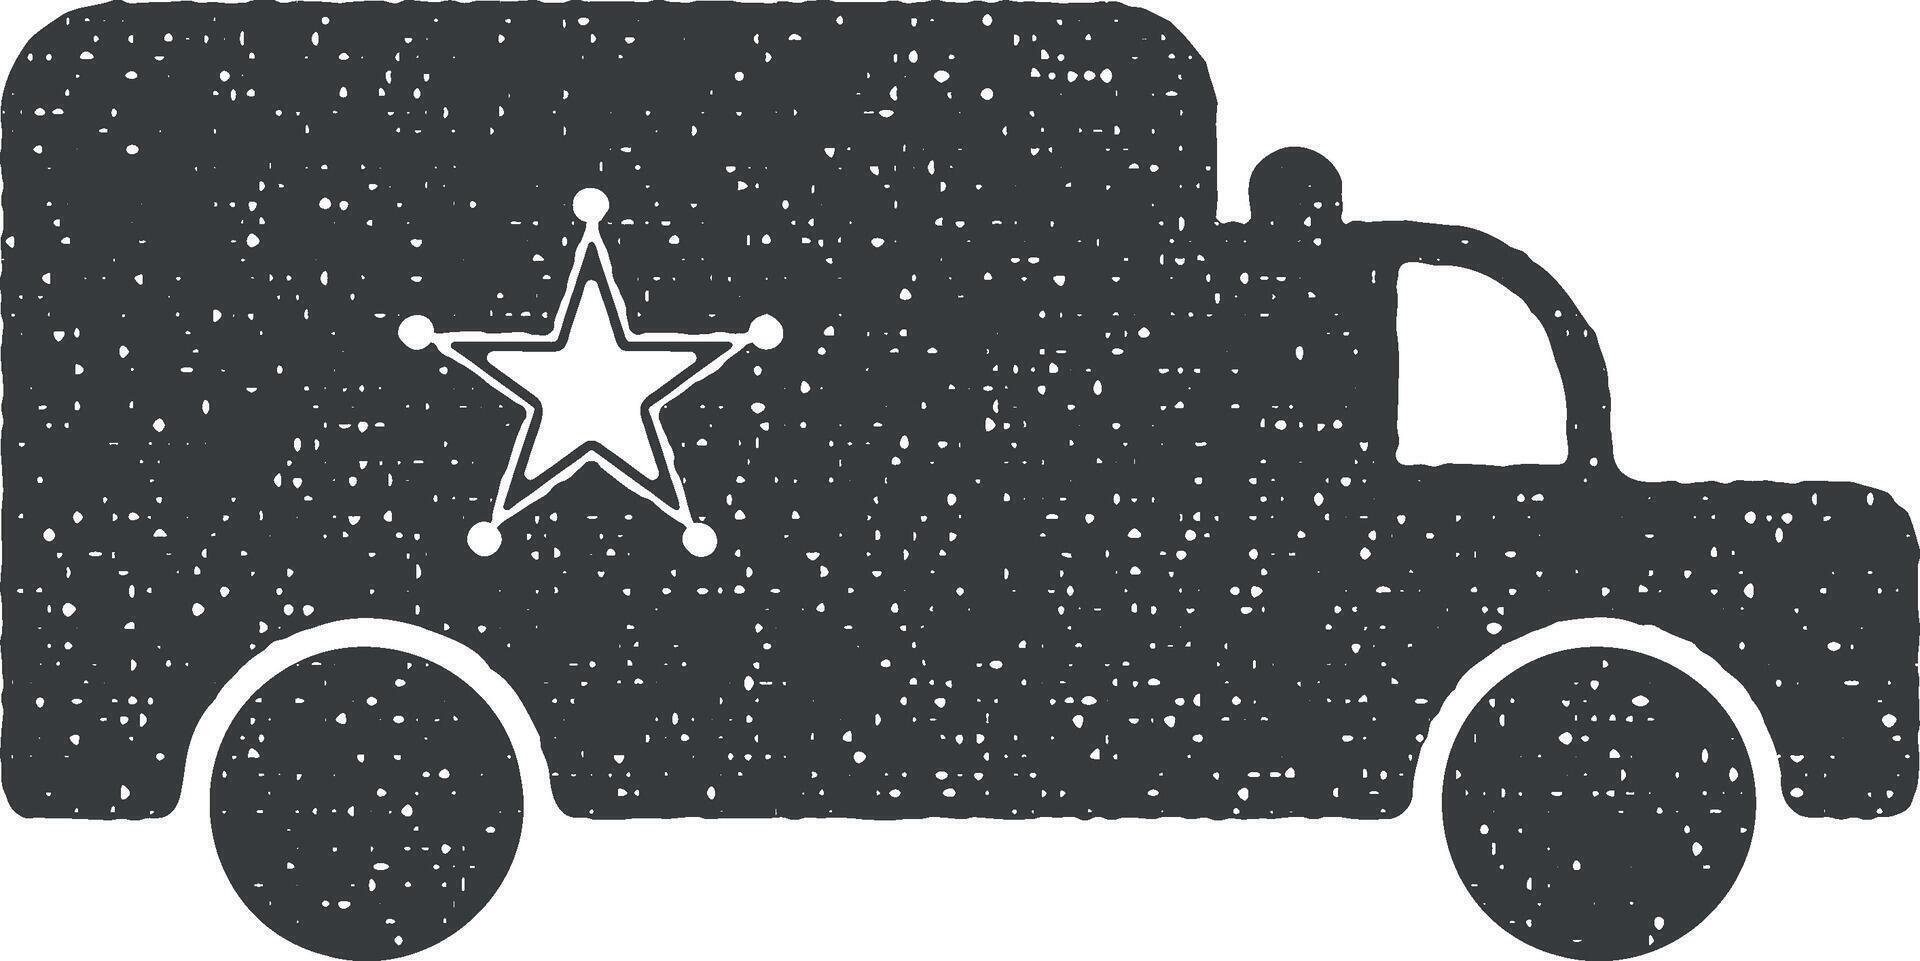 police truck vector icon illustration with stamp effect